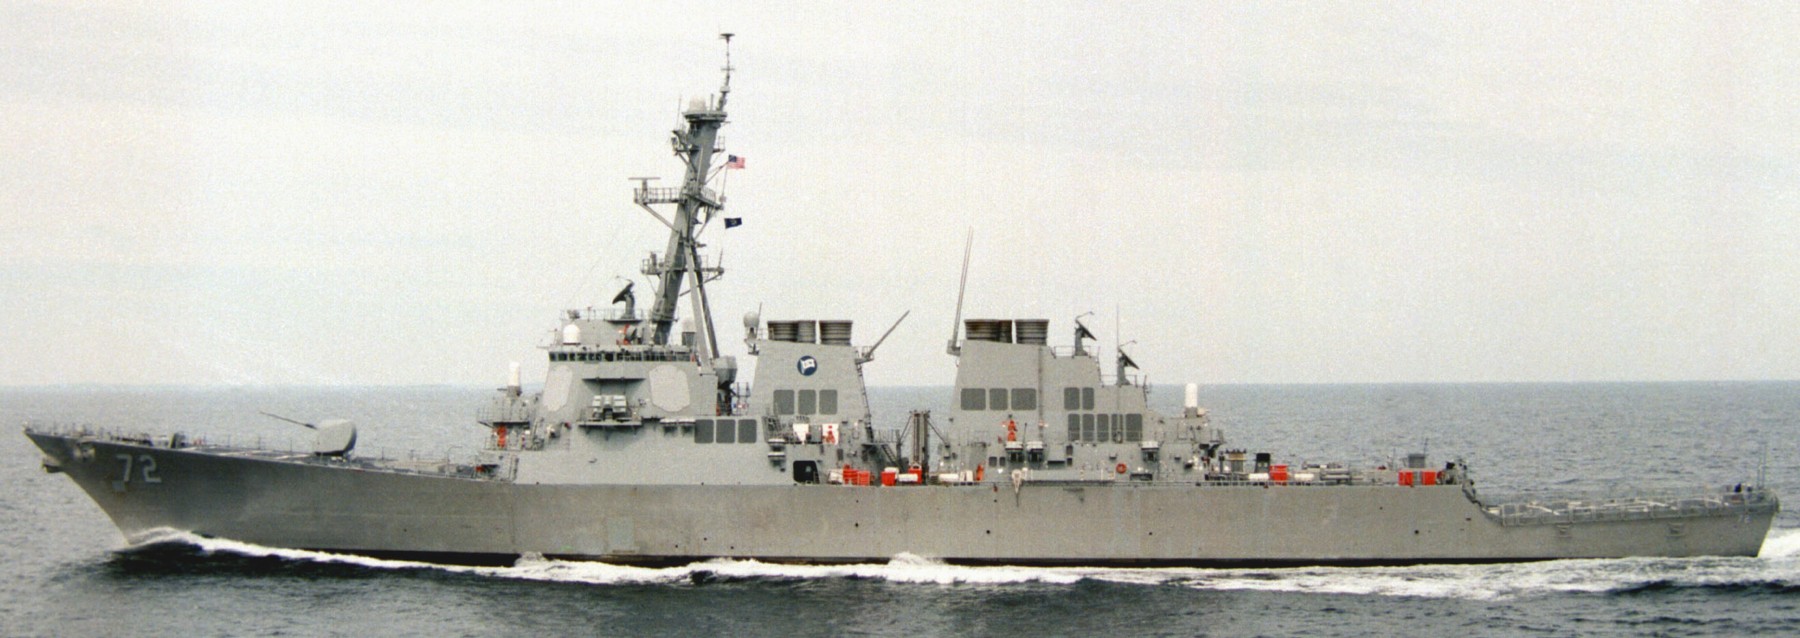 ddg-72 uss mahan guided missile destroyer arleigh burke class aegis bmd 49